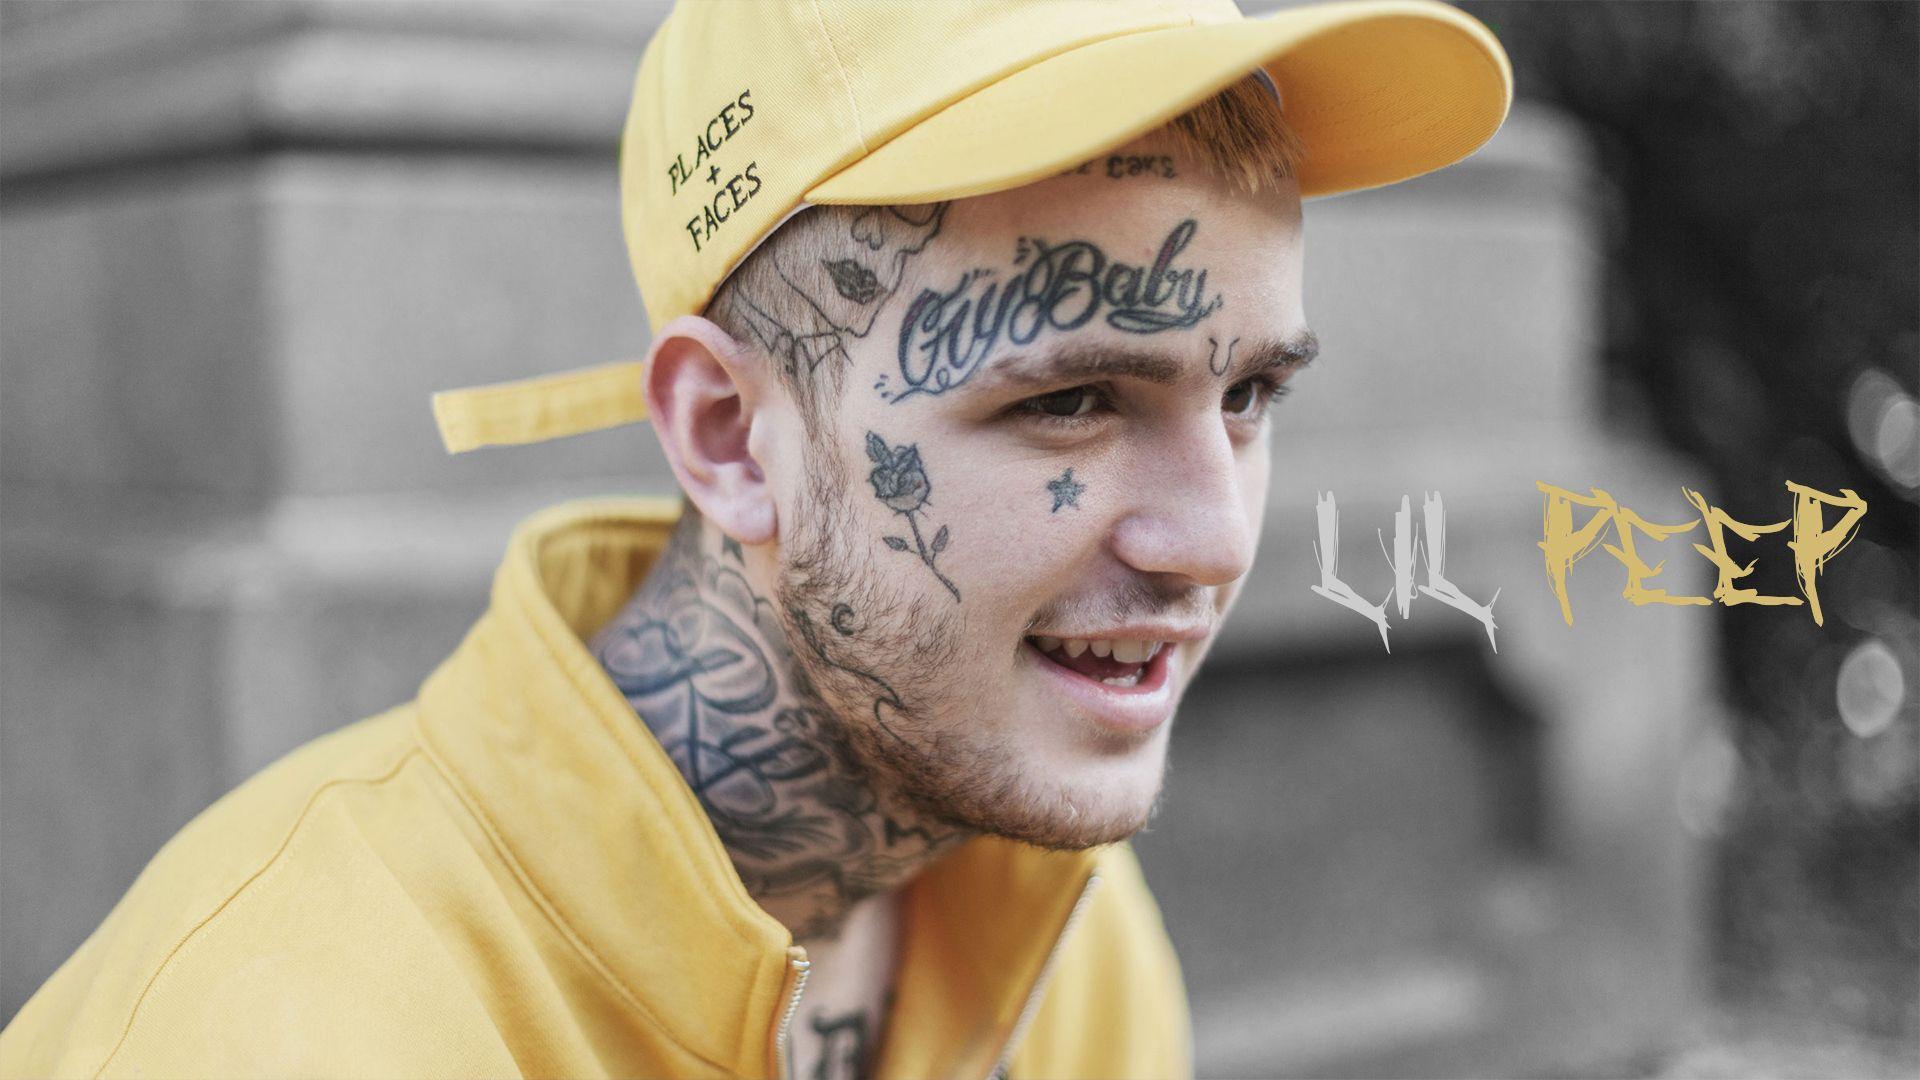 Lil Peep Computers Wallpapers - Wallpaper Cave